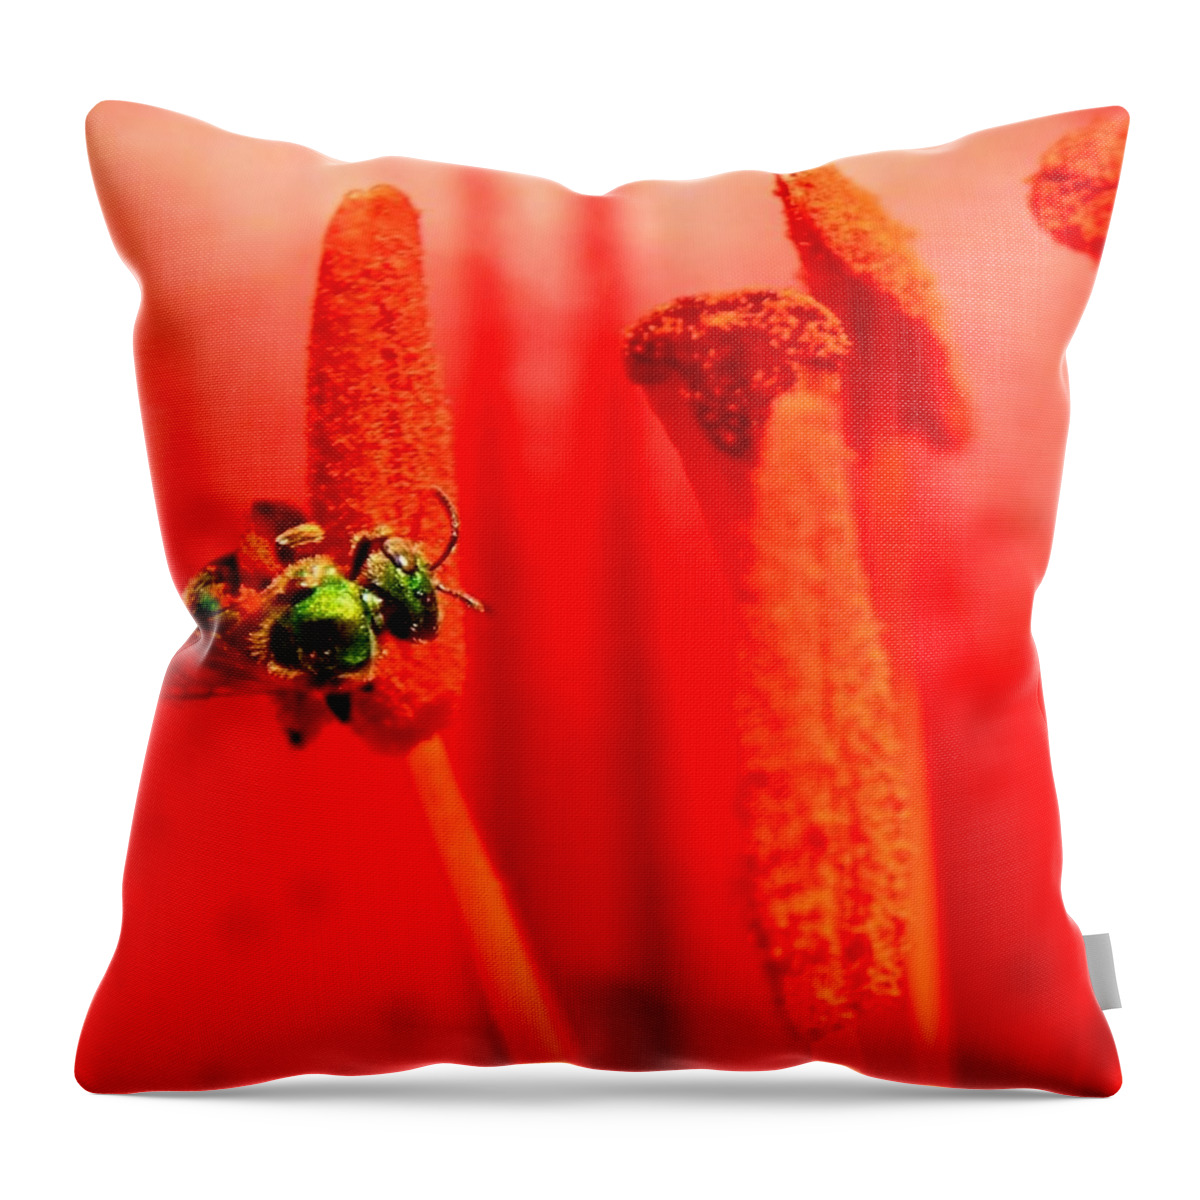 Lily Jewels Throw Pillow featuring the photograph Lily Jewels by Elizabeth Sullivan